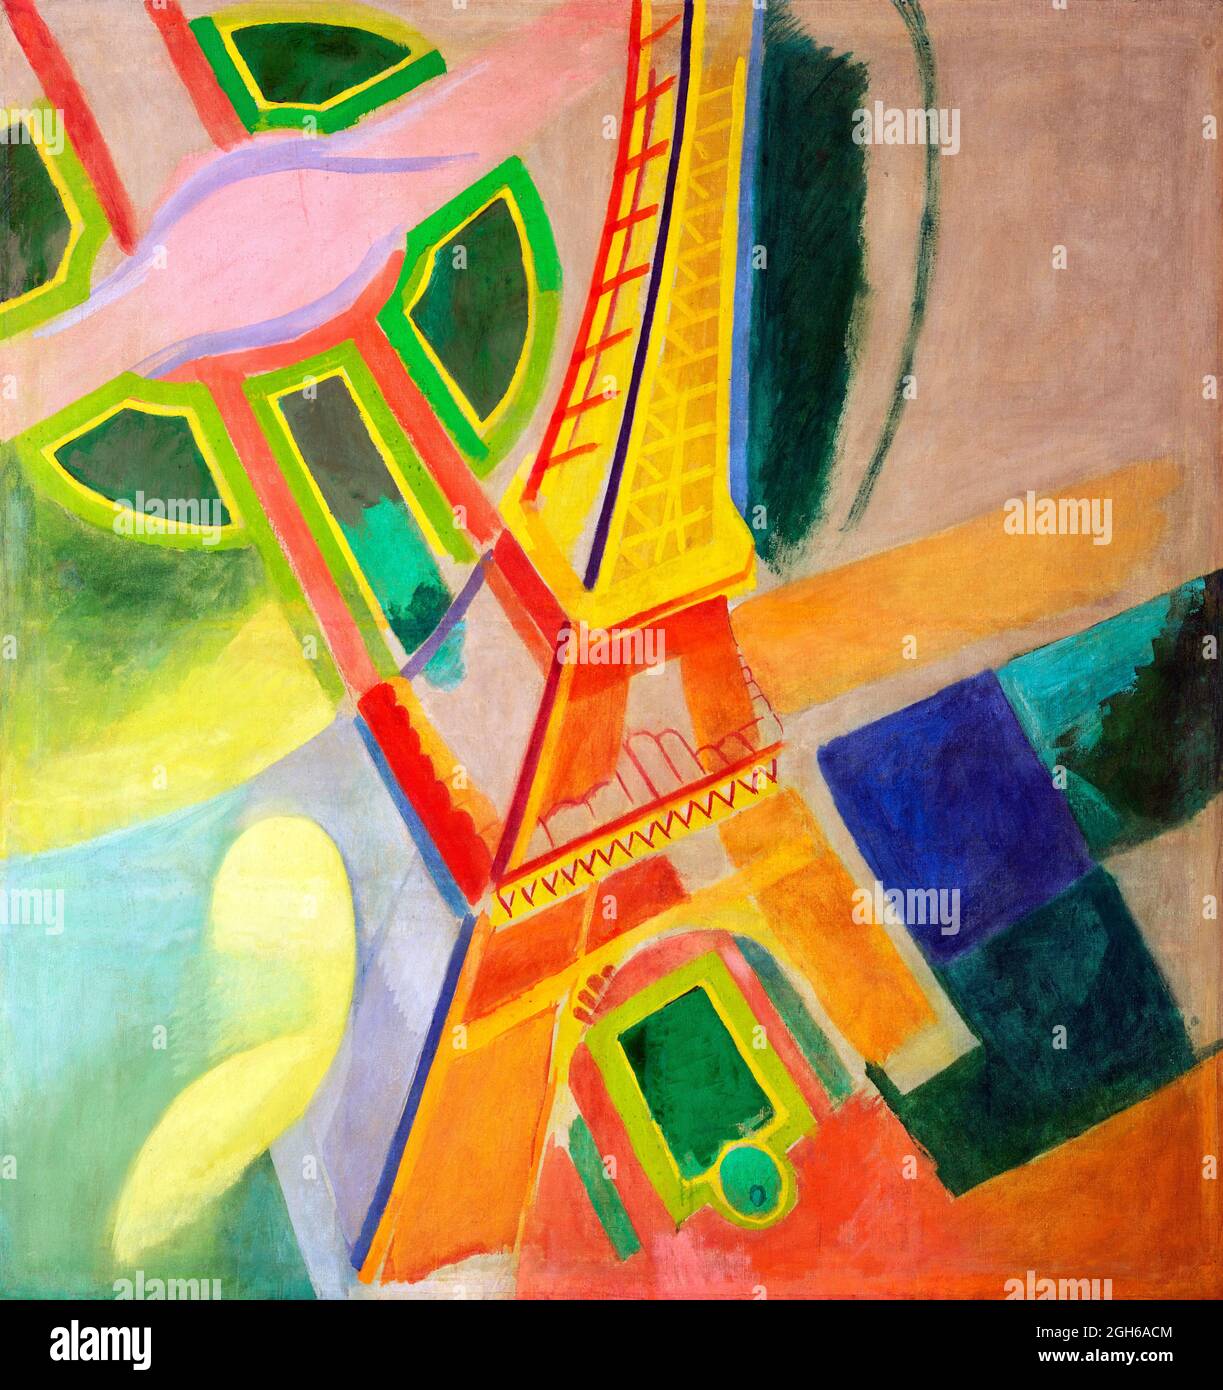 Robert Delaunay. Painting entitled 'Eiffel Tower' by the French artist, Robert Delaunay (1885-1941), oil on canvas, 1924 Stock Photo